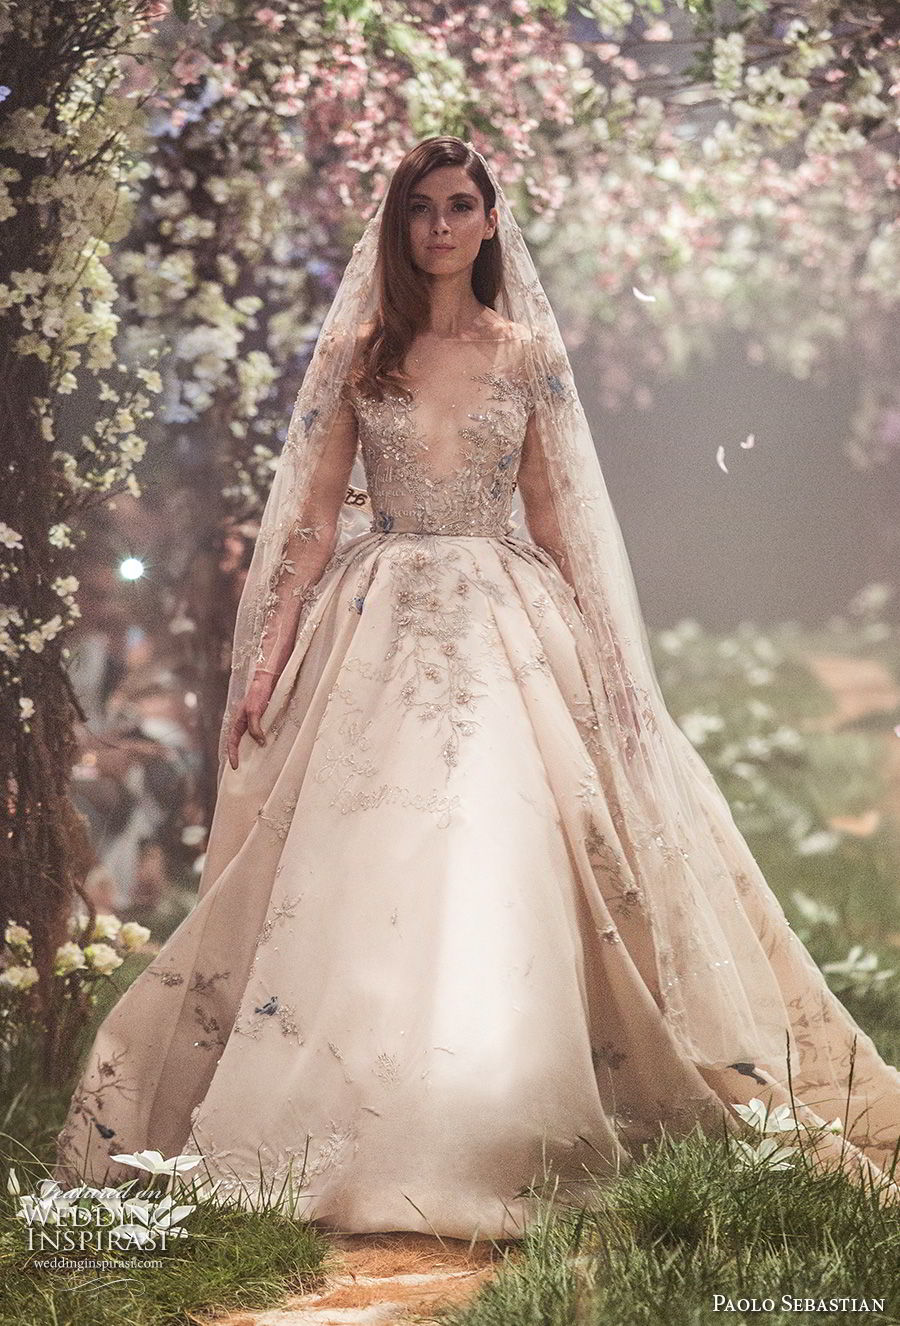 paolo sebastian once upon a dream prices